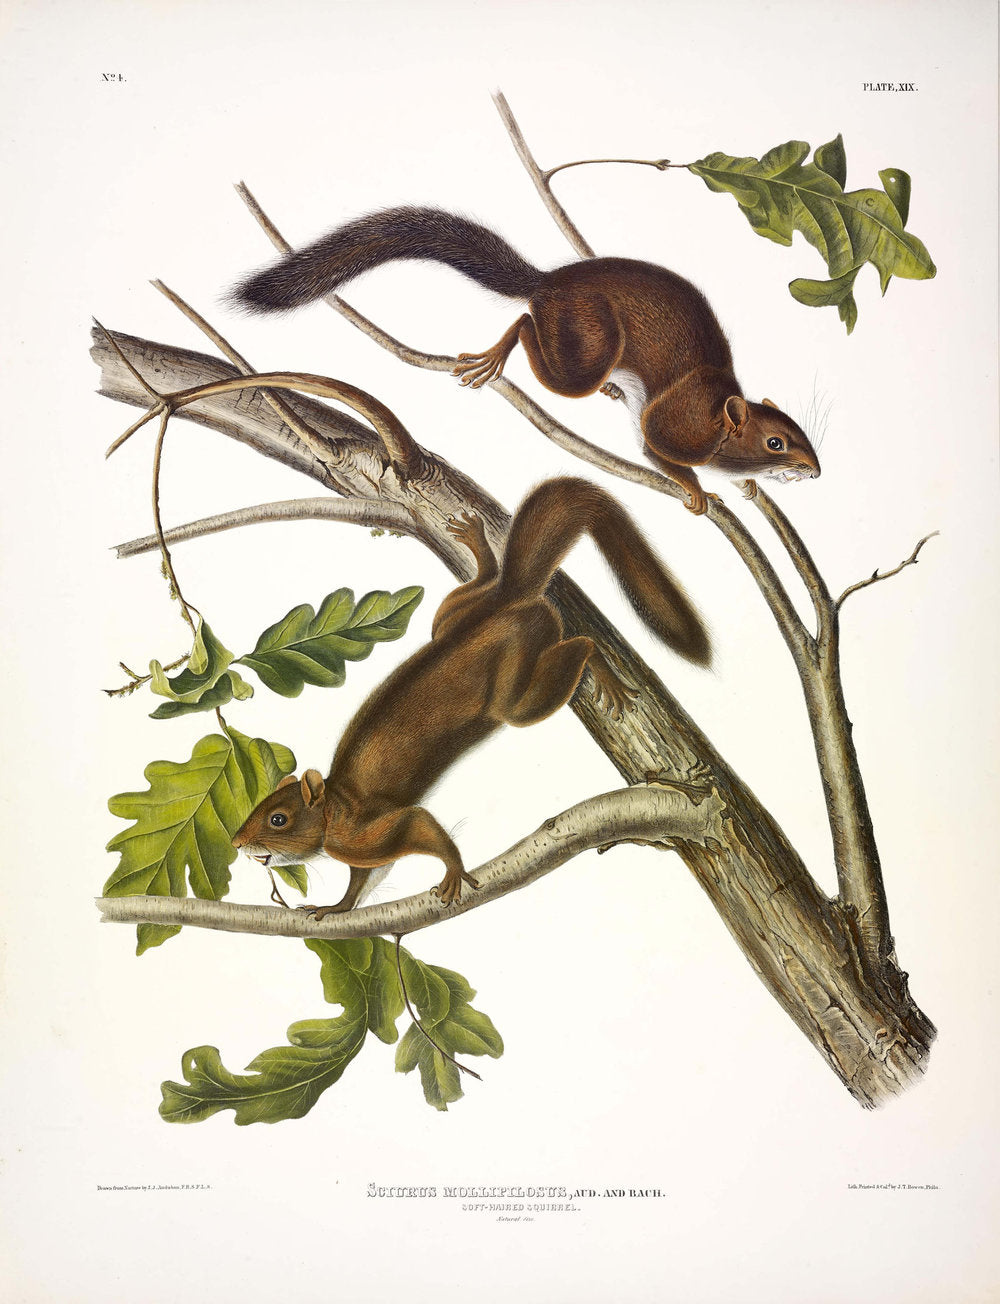 Painted by John James Audubon (1785-1851) with background likely by Victor Gifford Audubon (1809-1860)  Plate XIX - Soft Hare Squirrel  From: Viviparous Quadrupeds of North America  New York: 1845-1848  Hand colored lithograph  Sheet size: 21 ¼” x 27”